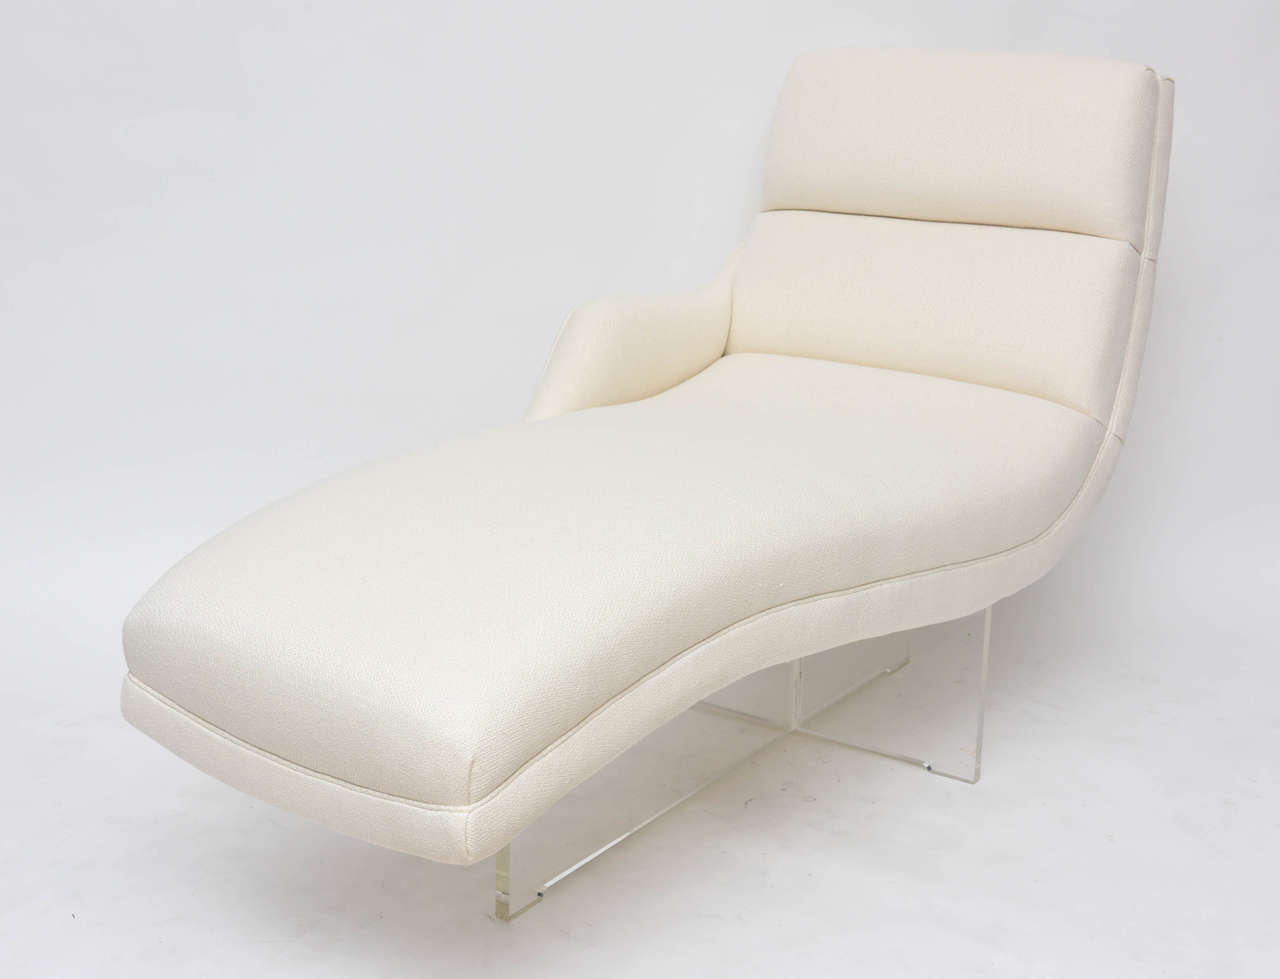 Curvy, sexy, left-arm Erica lounge chair by Vladimir Kagan. Acrylic base, upholstered in rich, creamy silk.